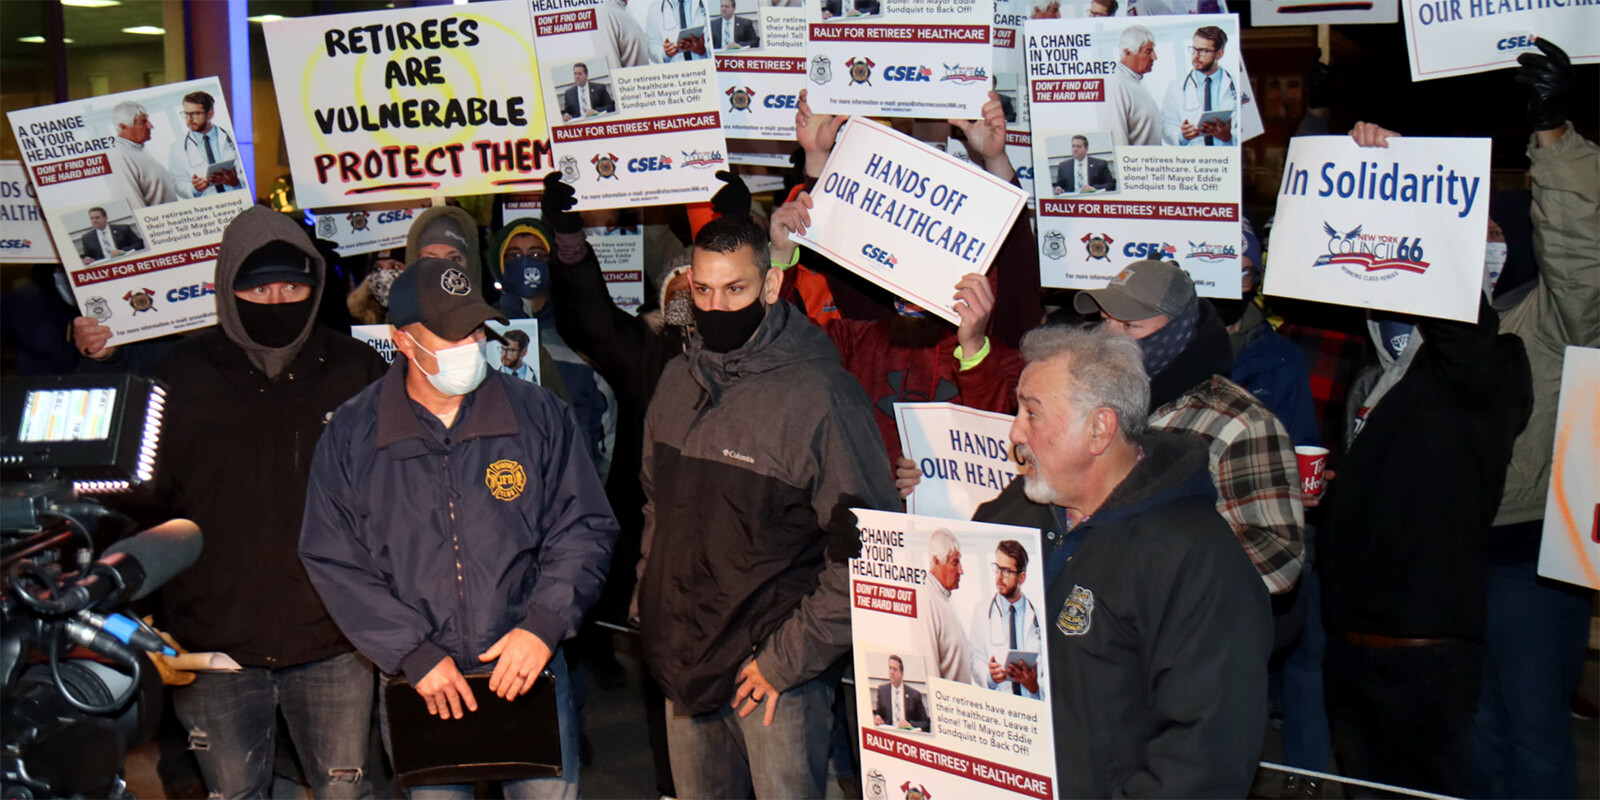 Western New York workers rally to save retiree health care benefits